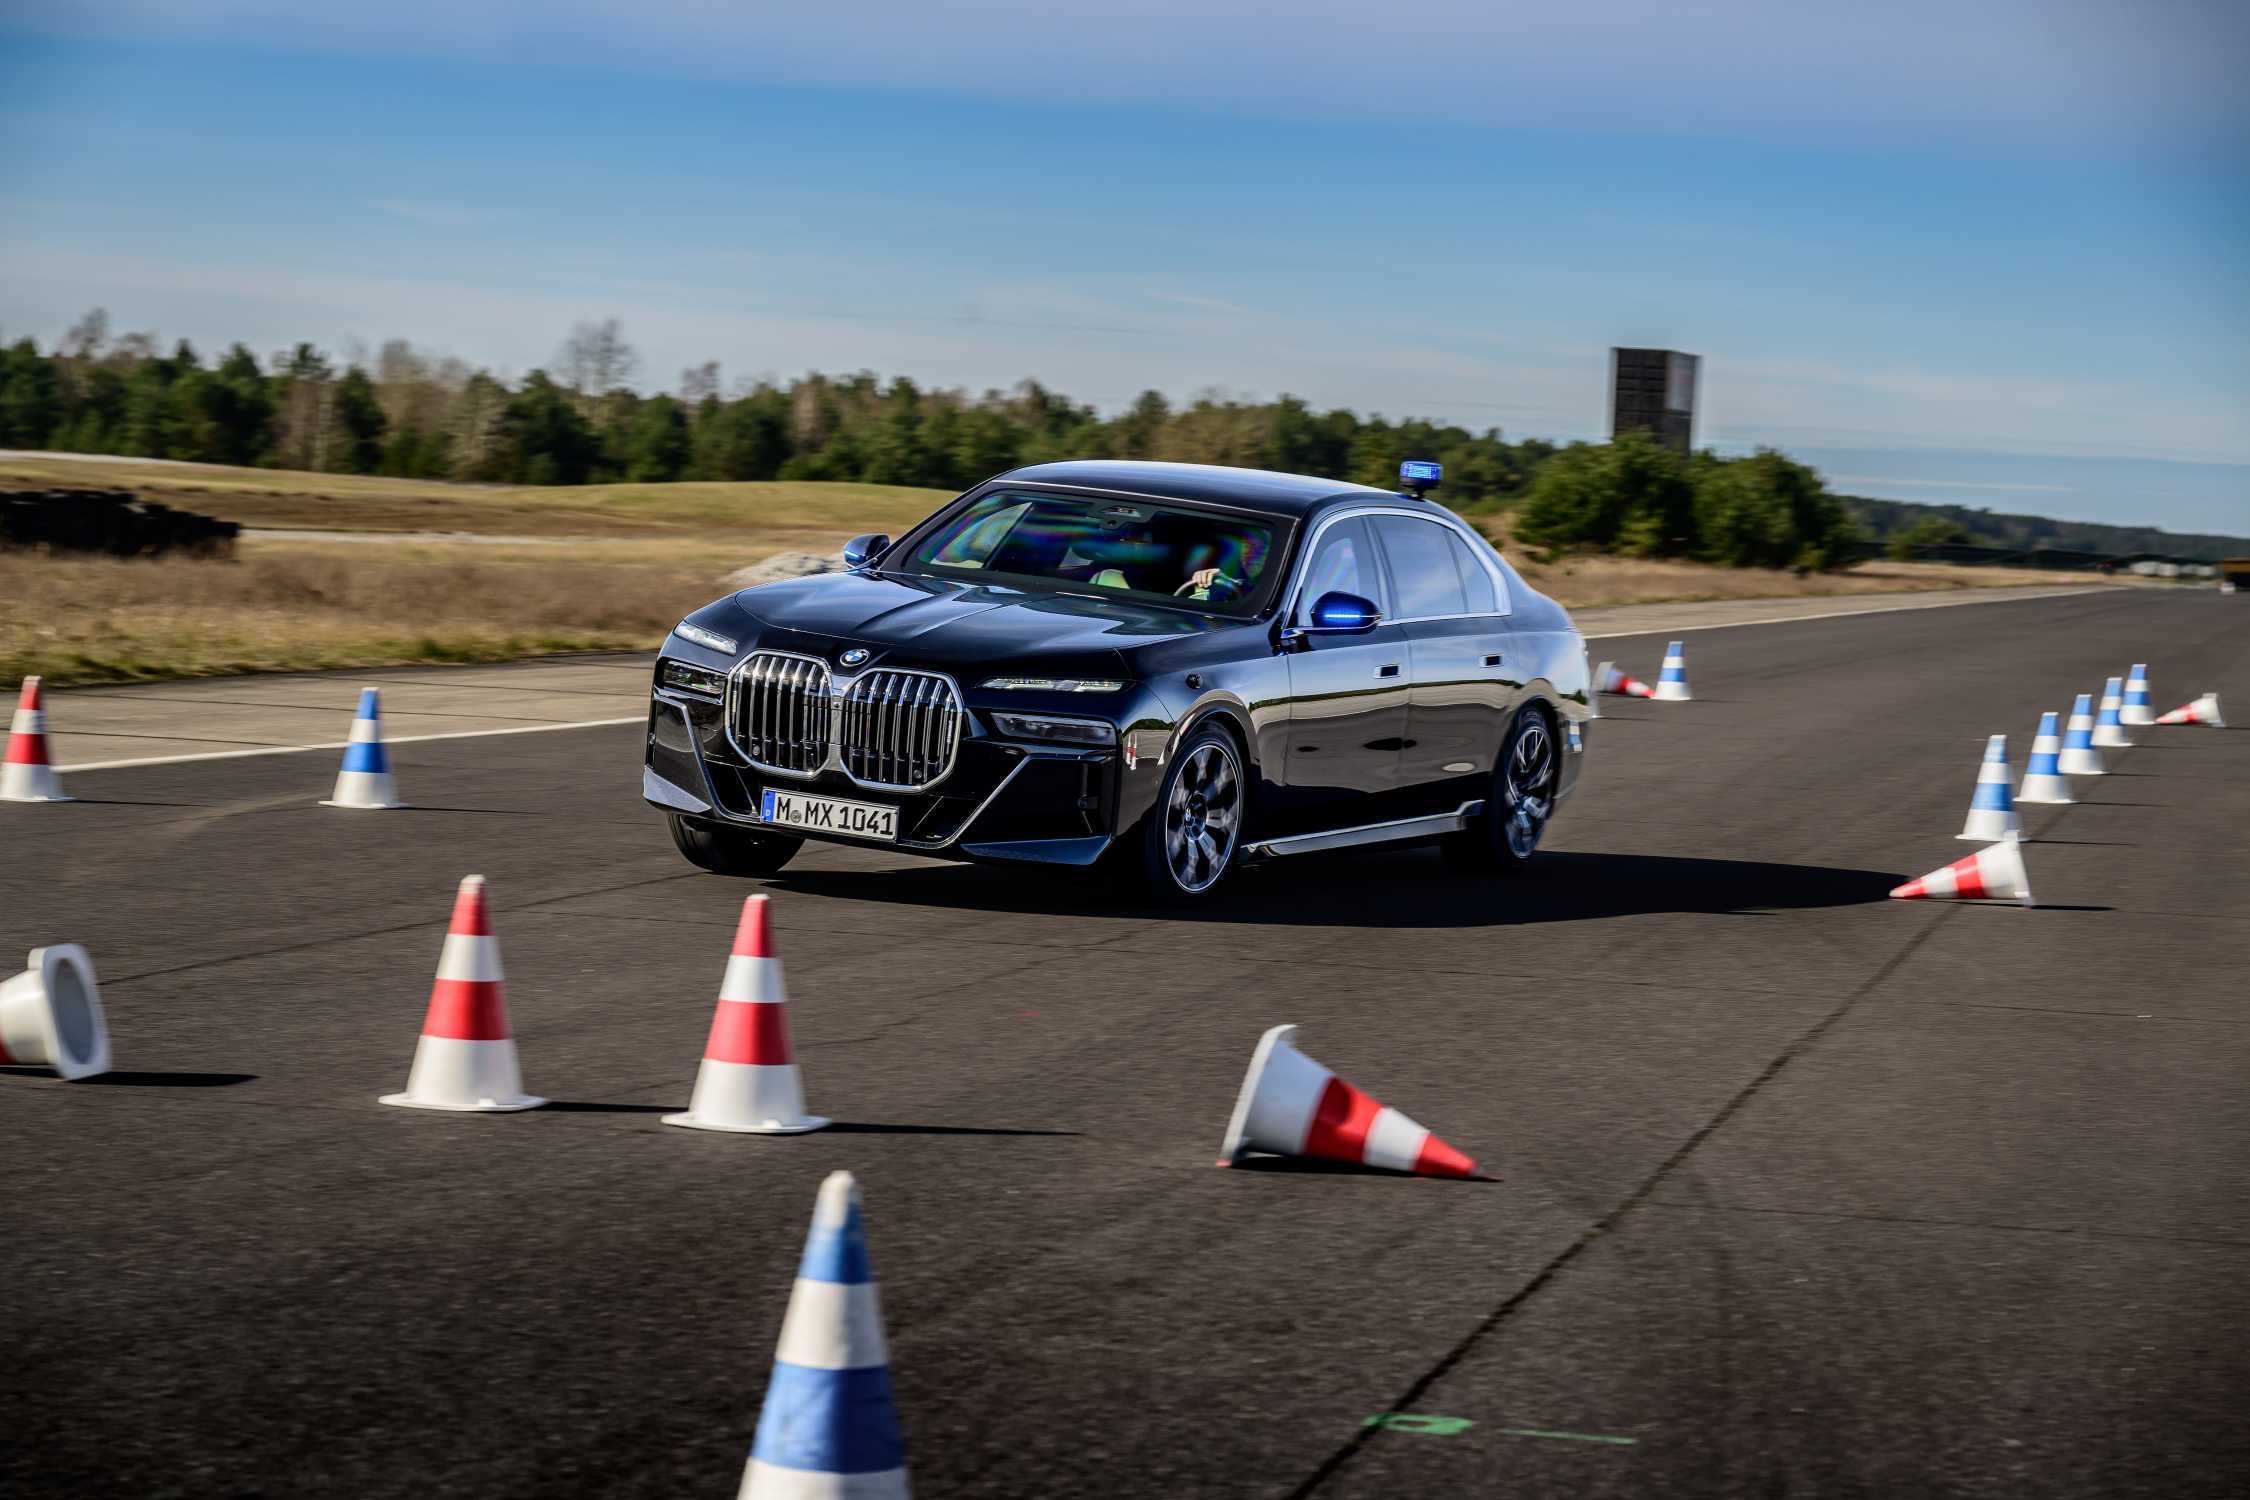 BMW Security Vehicle Trainings: Customised security from a single source.